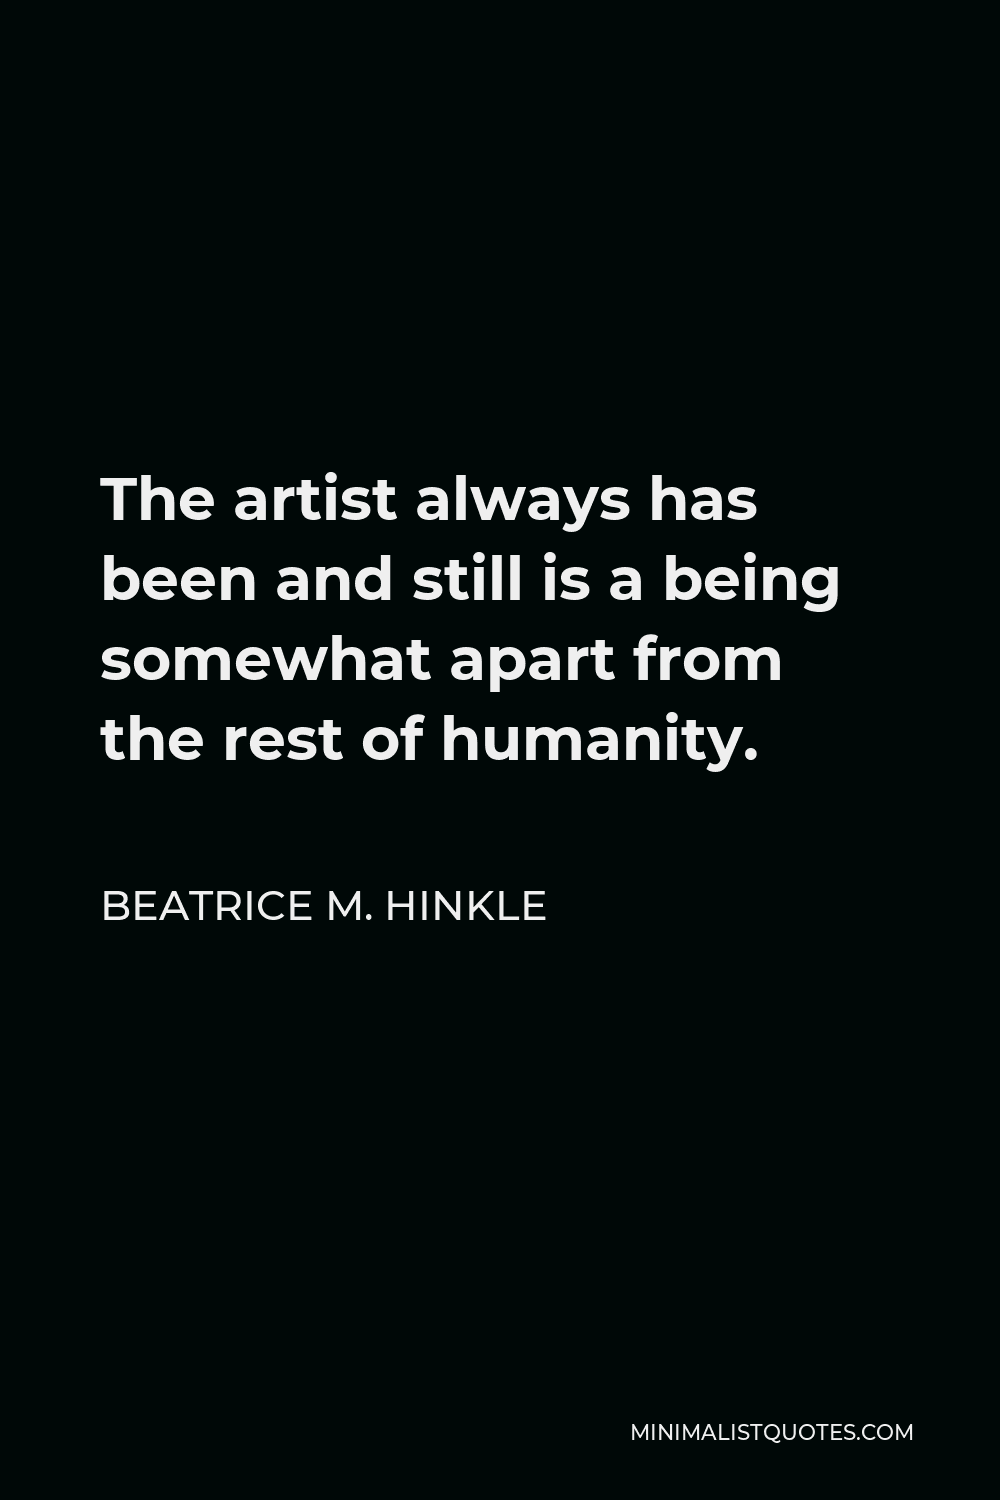 Beatrice M. Hinkle Quote - The artist always has been and still is a being somewhat apart from the rest of humanity.